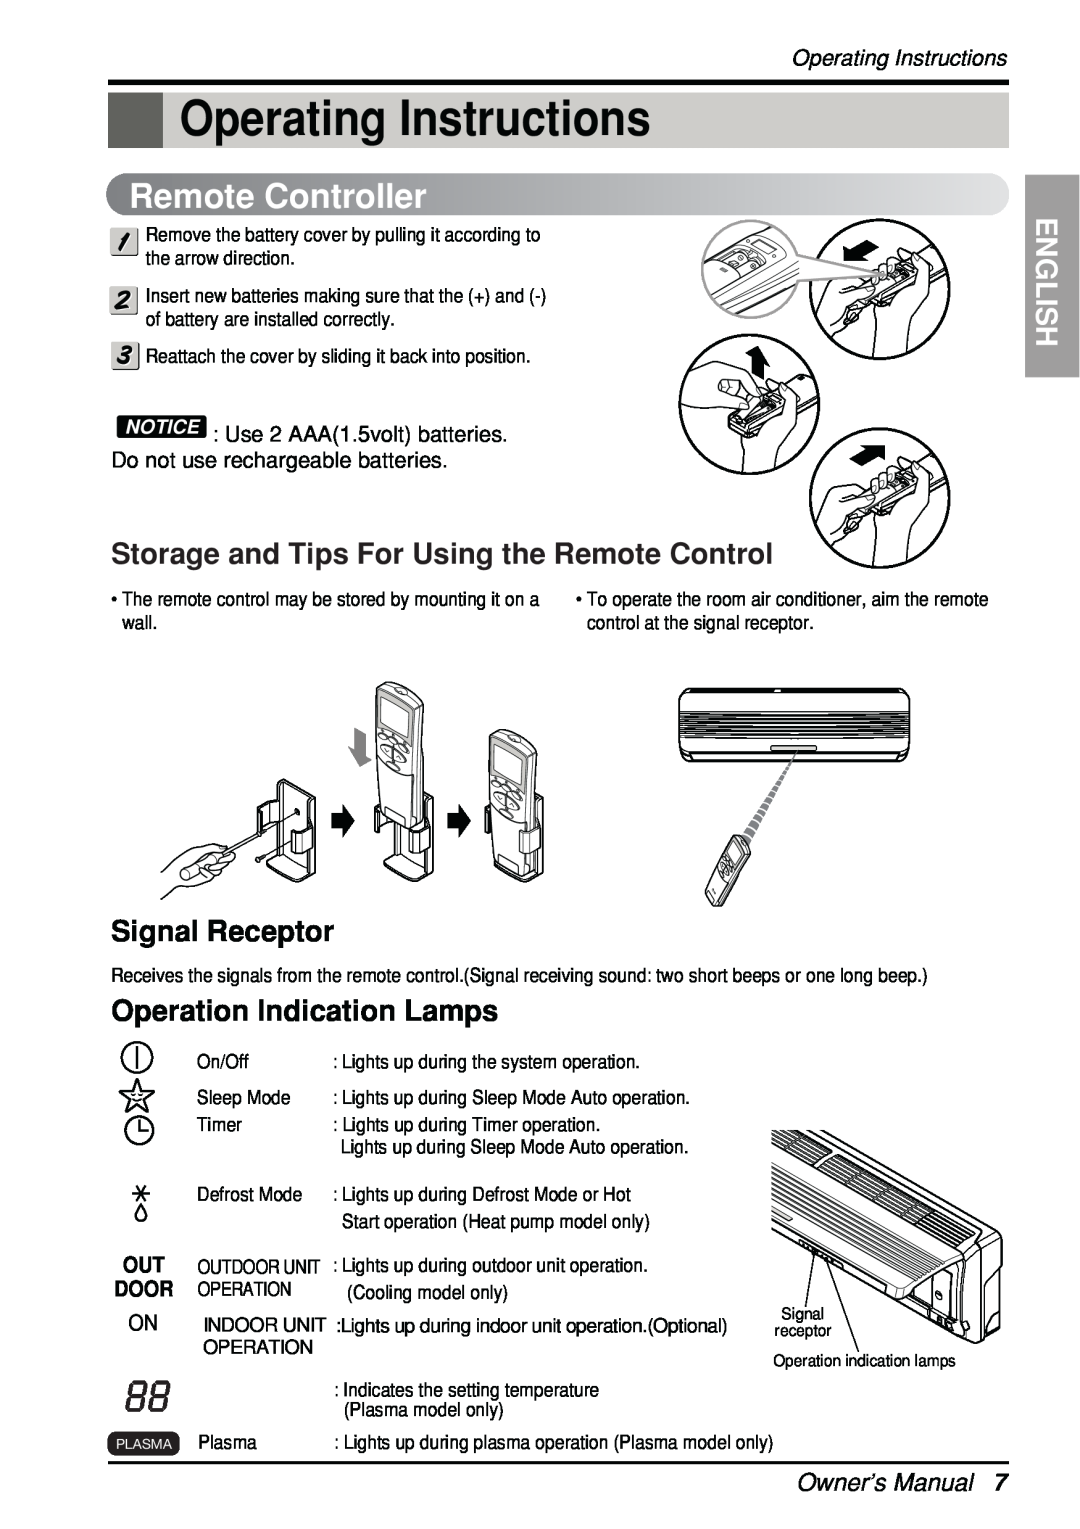 Beko LG-BKE 6700 D, LG-BKE 6800 D Operating Instructions, Remote Controller, Storage and Tips For Using the Remote Control 